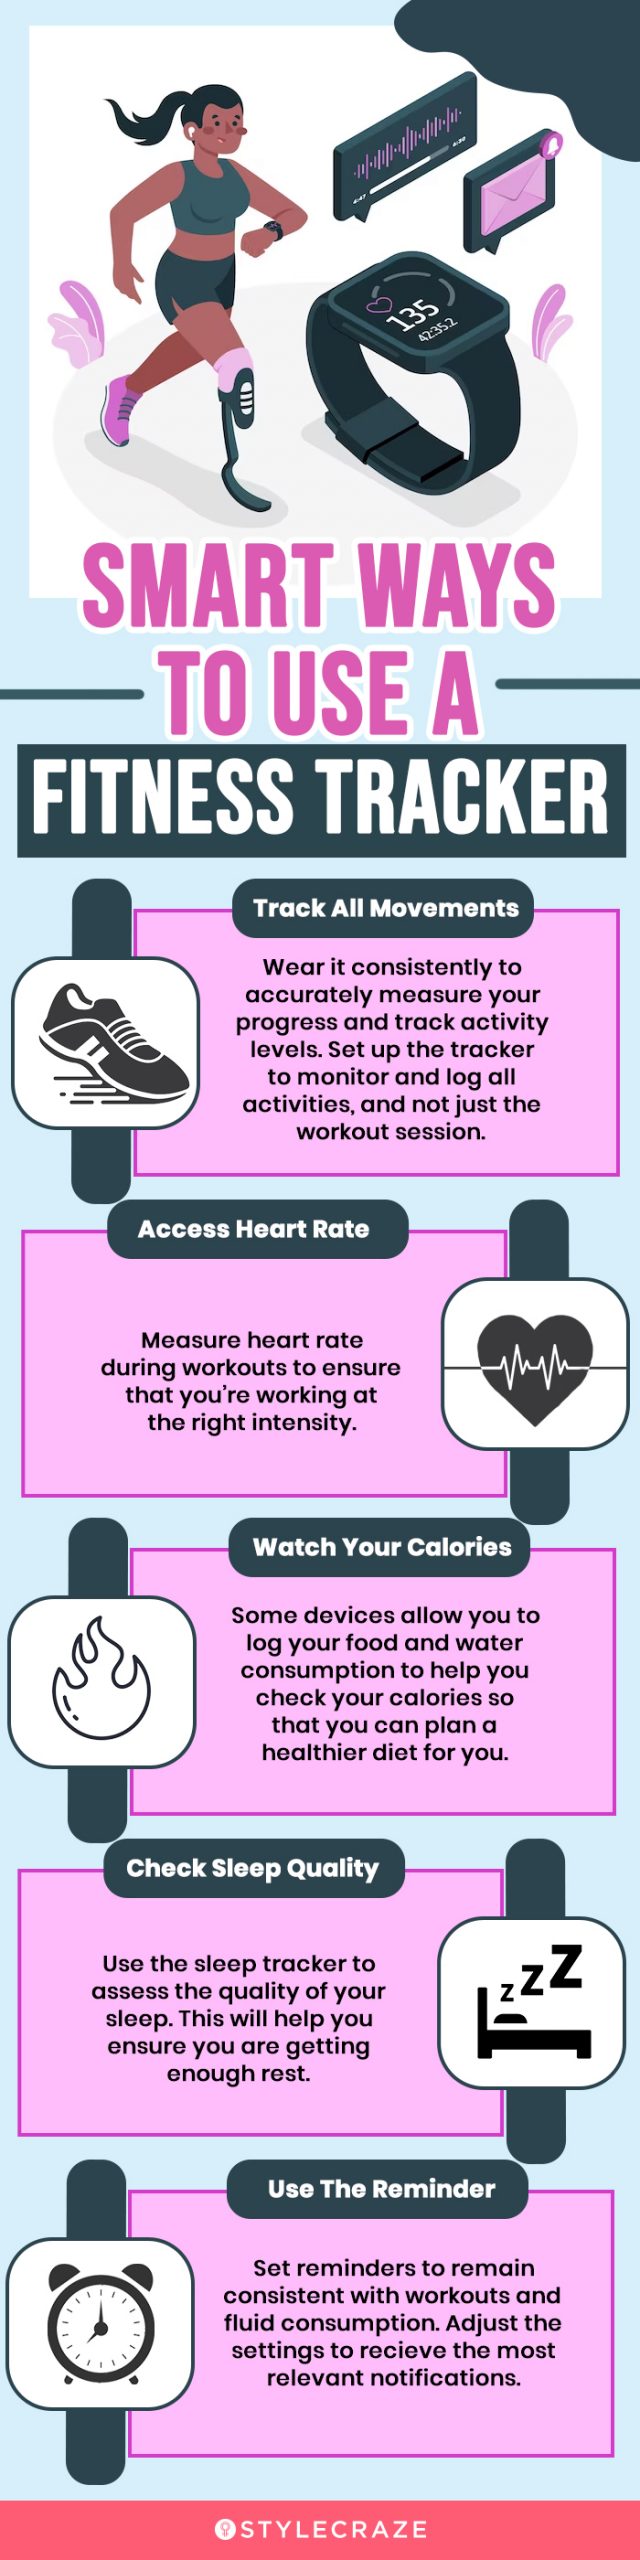 Smart Ways To Use A Fitness Tracker (infographic)